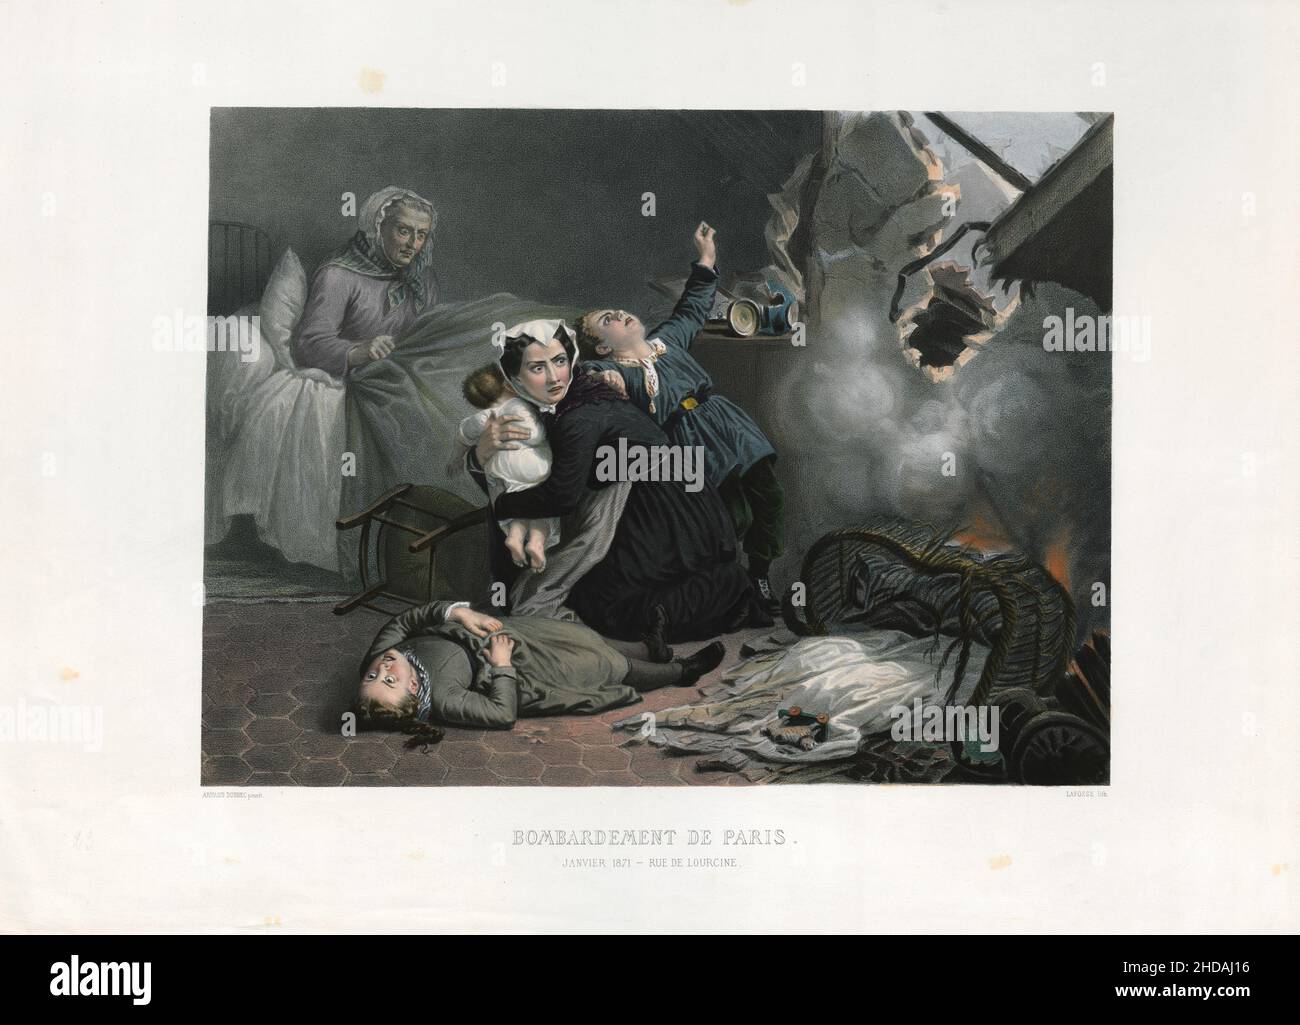 Vintage French anti-German lithograph from French-Prussian war period: Bombing Of Paris: January 1871, Rue De Lourcine. 1871 Stock Photo